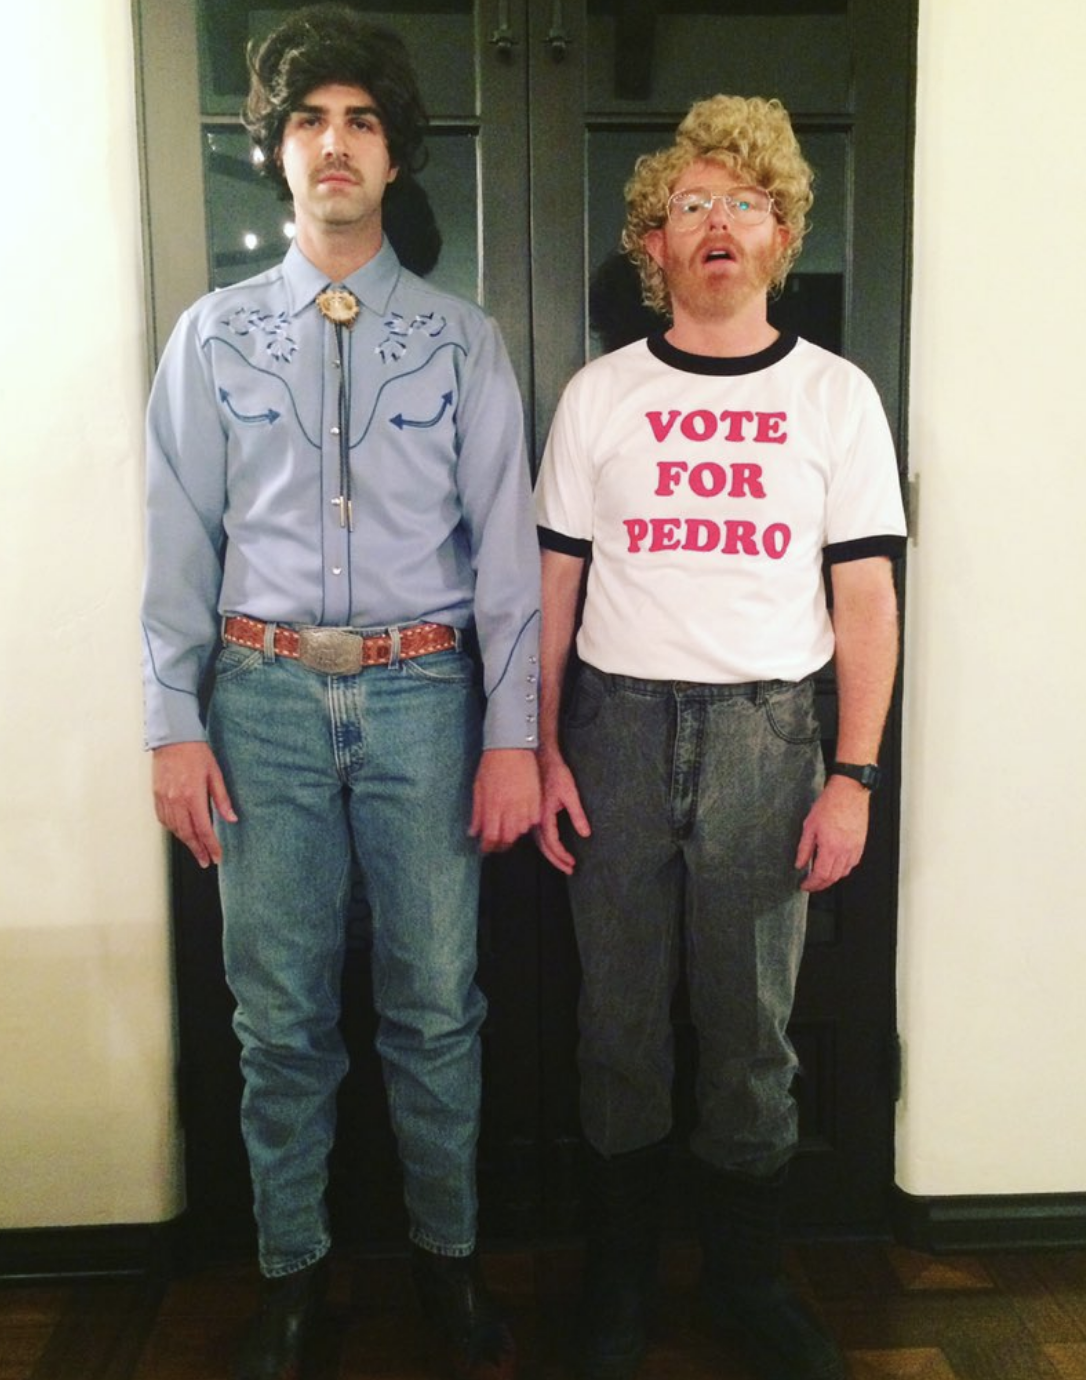 both in the outfits, one wearing the vote for pedro shirt